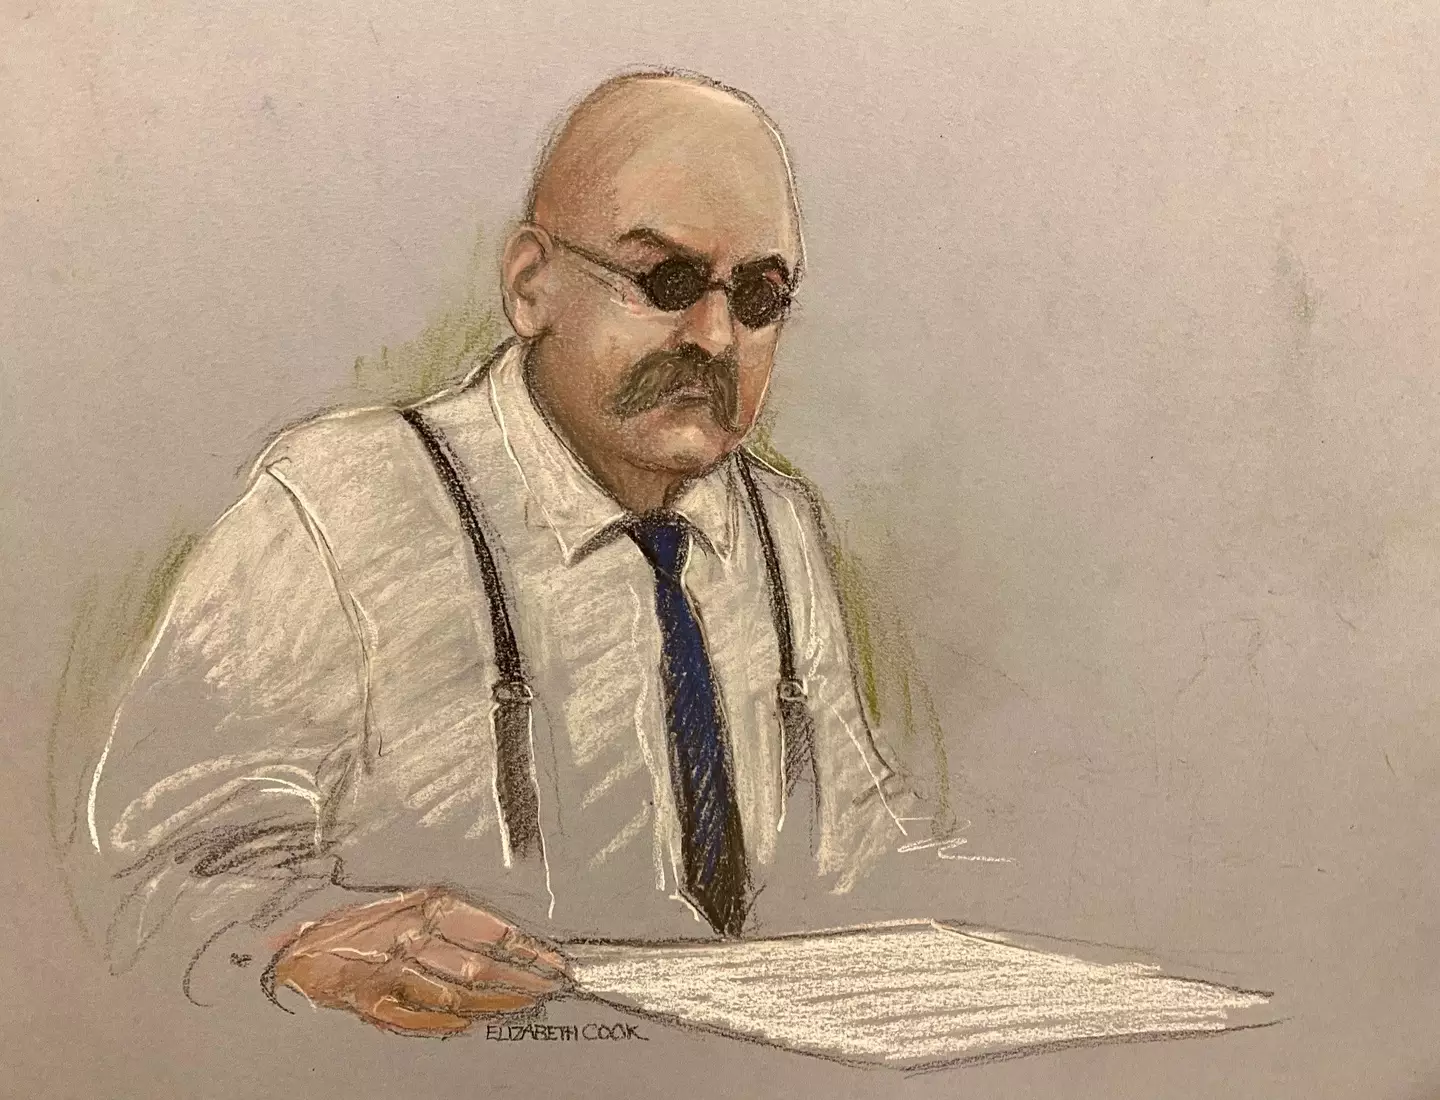 A psychologist has given her take on whether Charles Bronson should be freed.